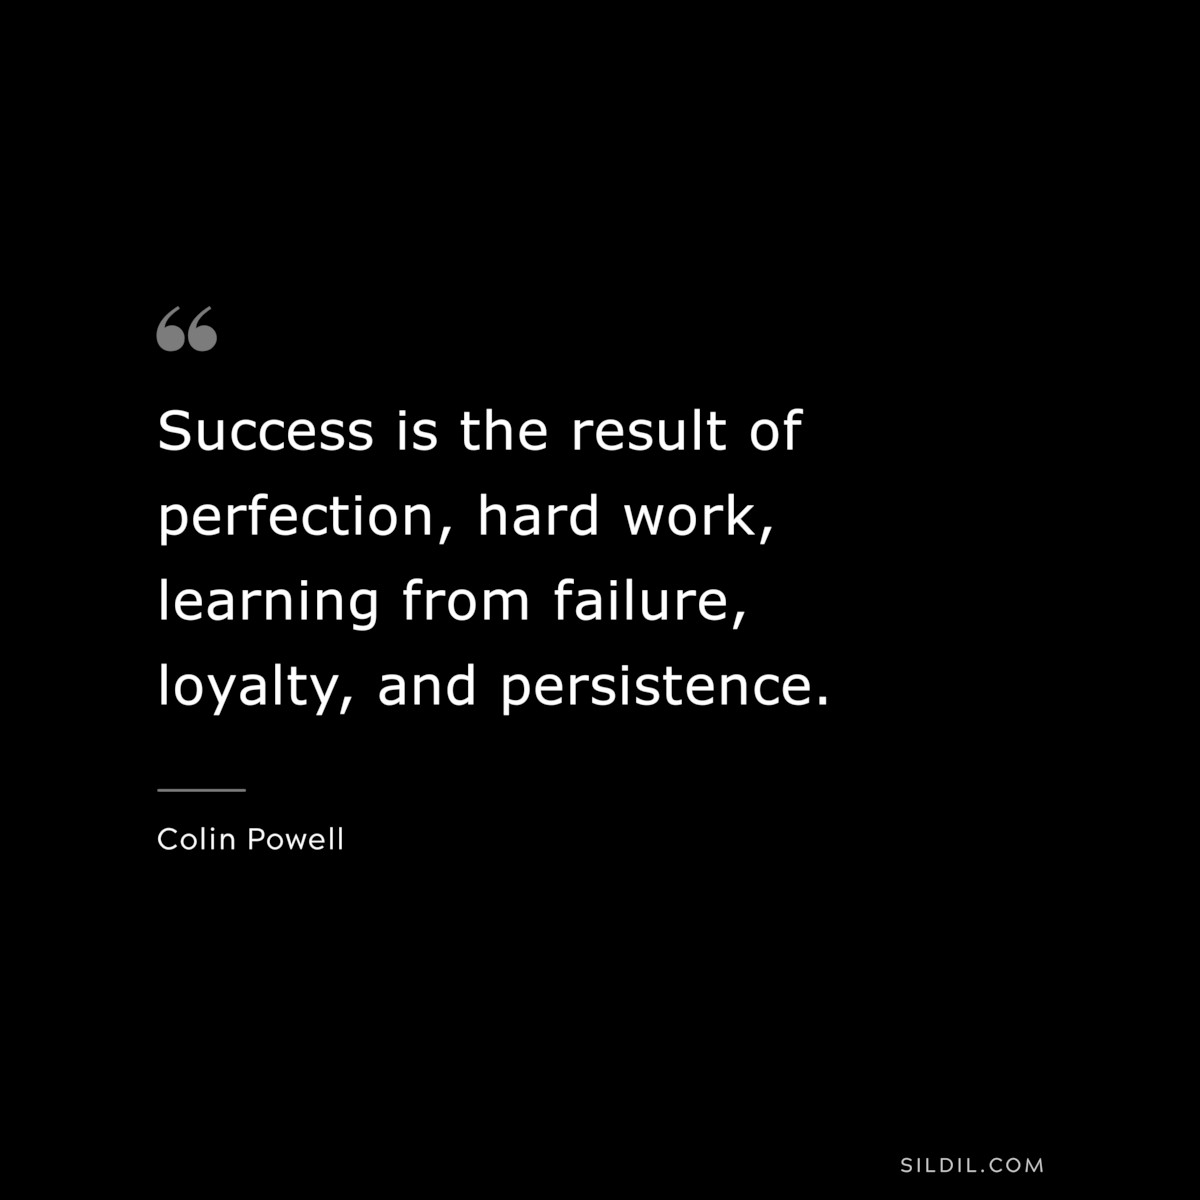 Success is the result of perfection, hard work, learning from failure, loyalty, and persistence. ― Colin Powell